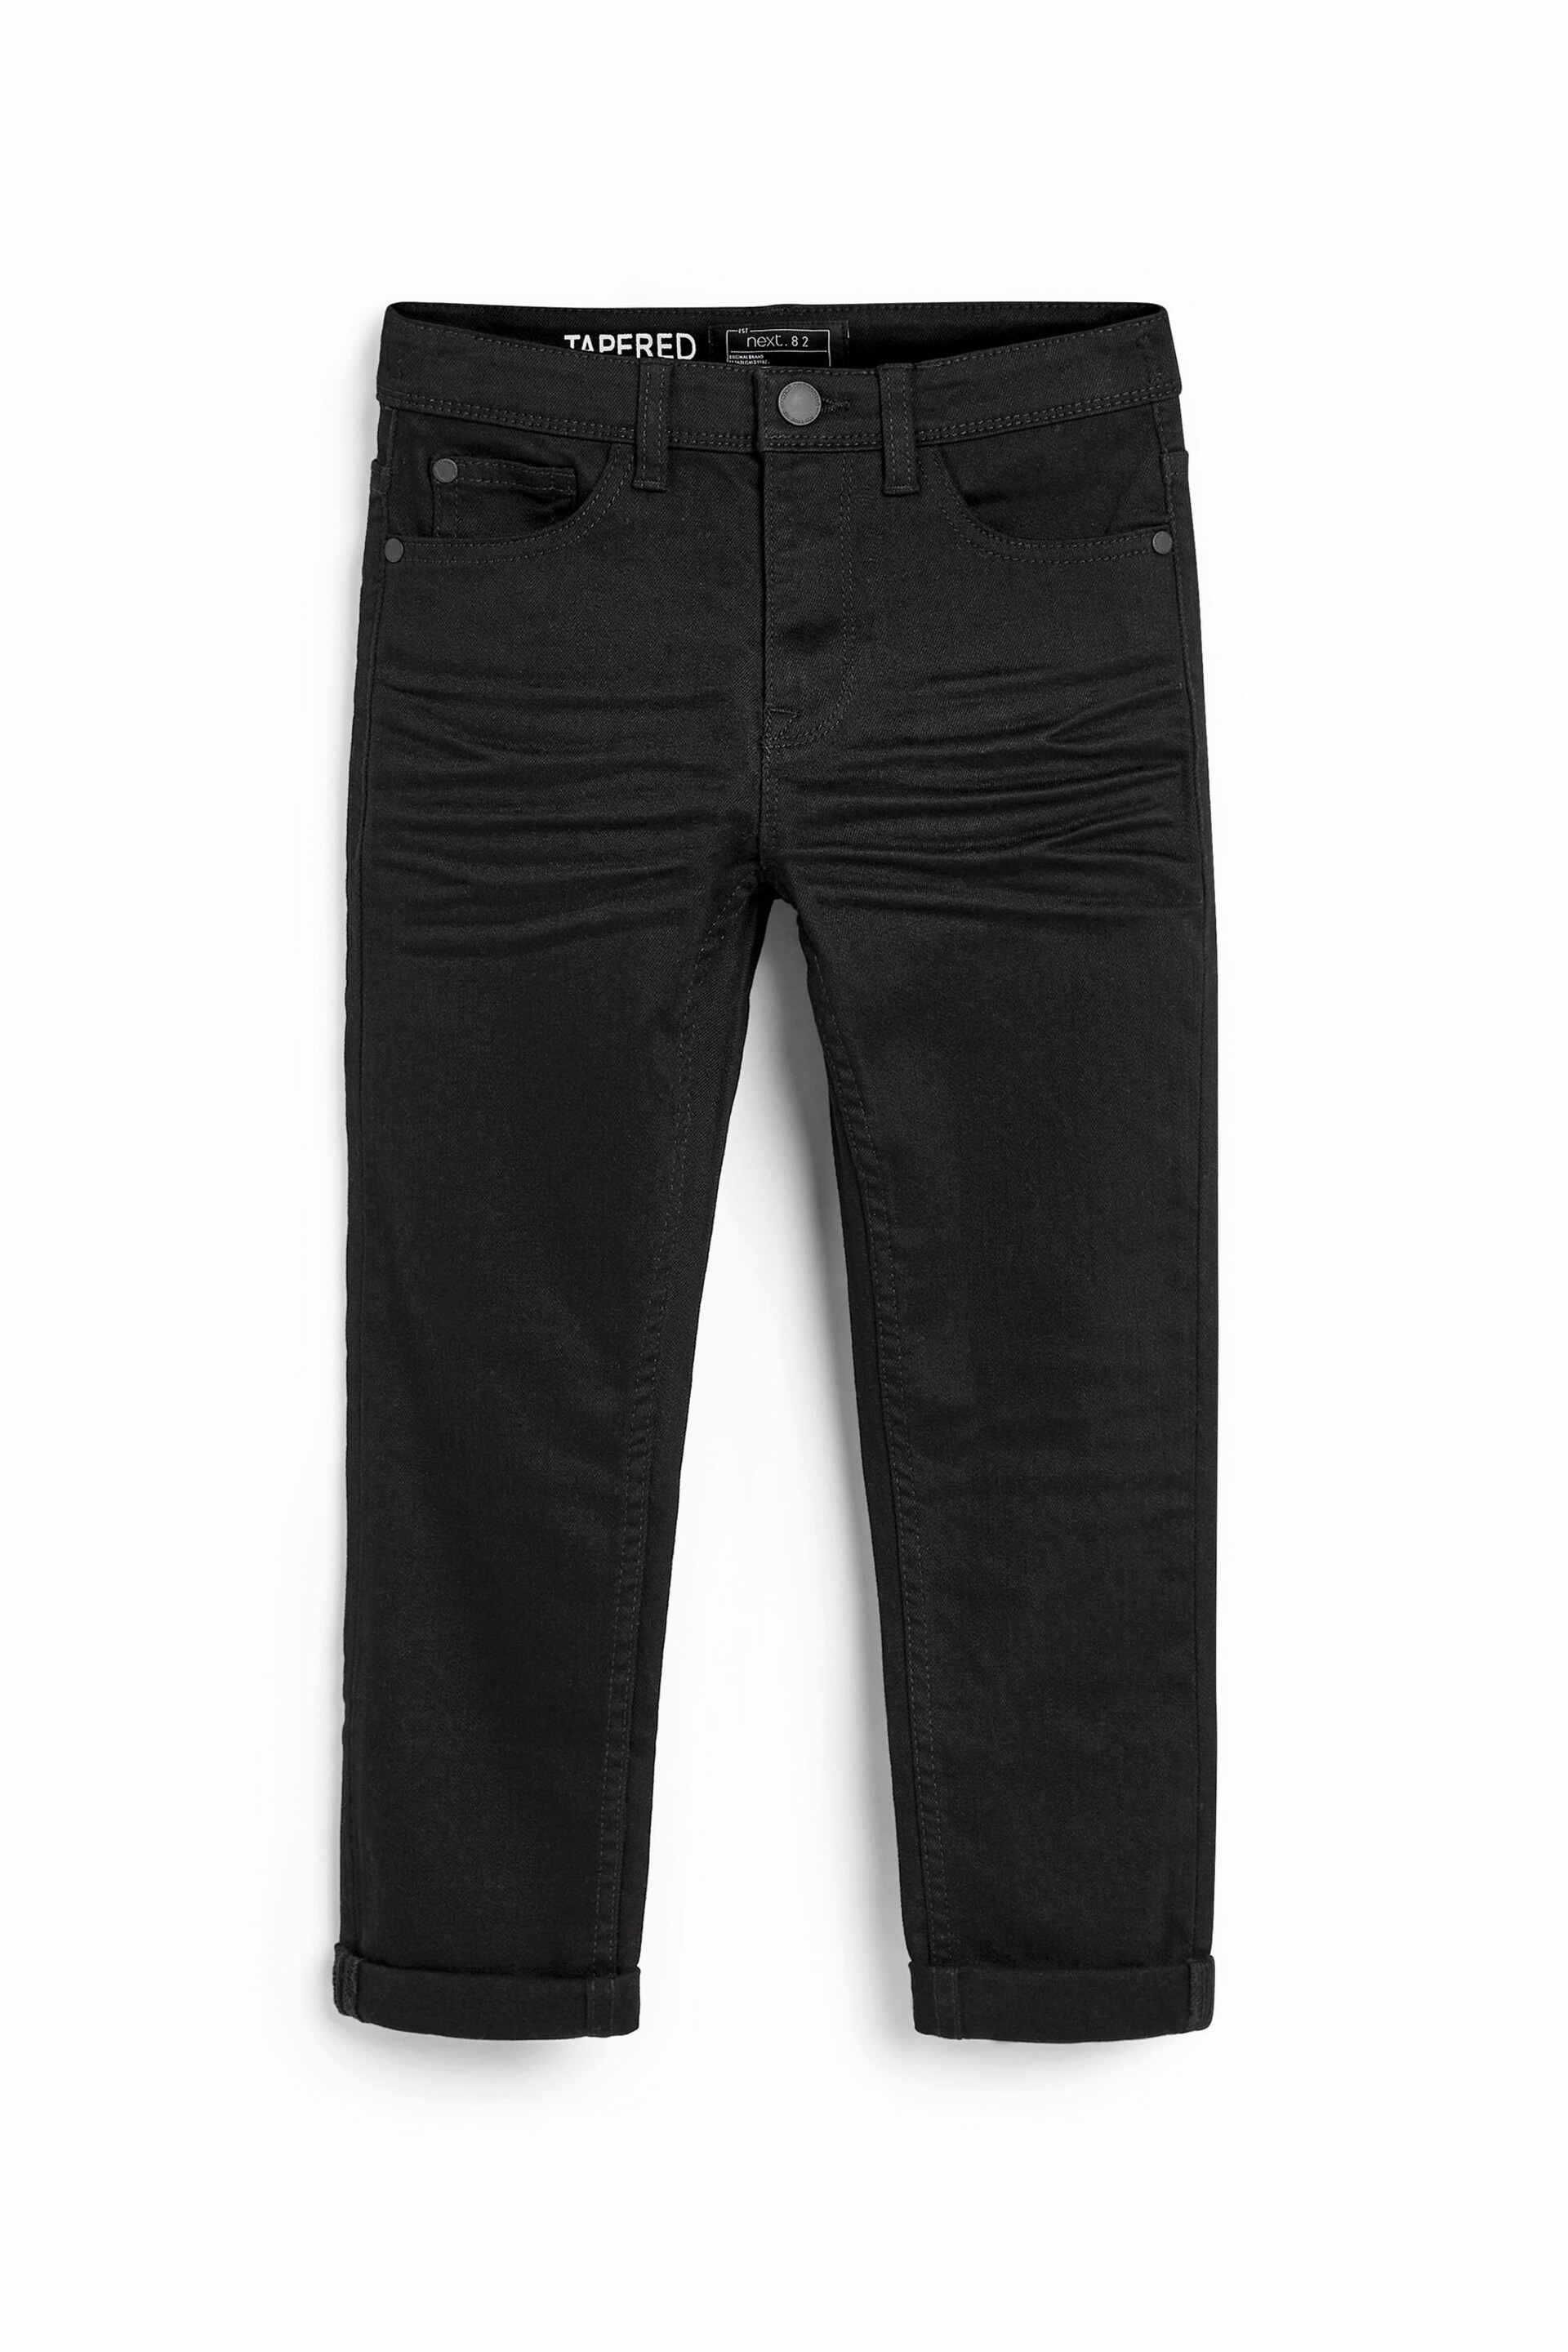 Black Tapered Fit Cotton Rich Stretch Jeans (3-17yrs) - Image 1 of 3